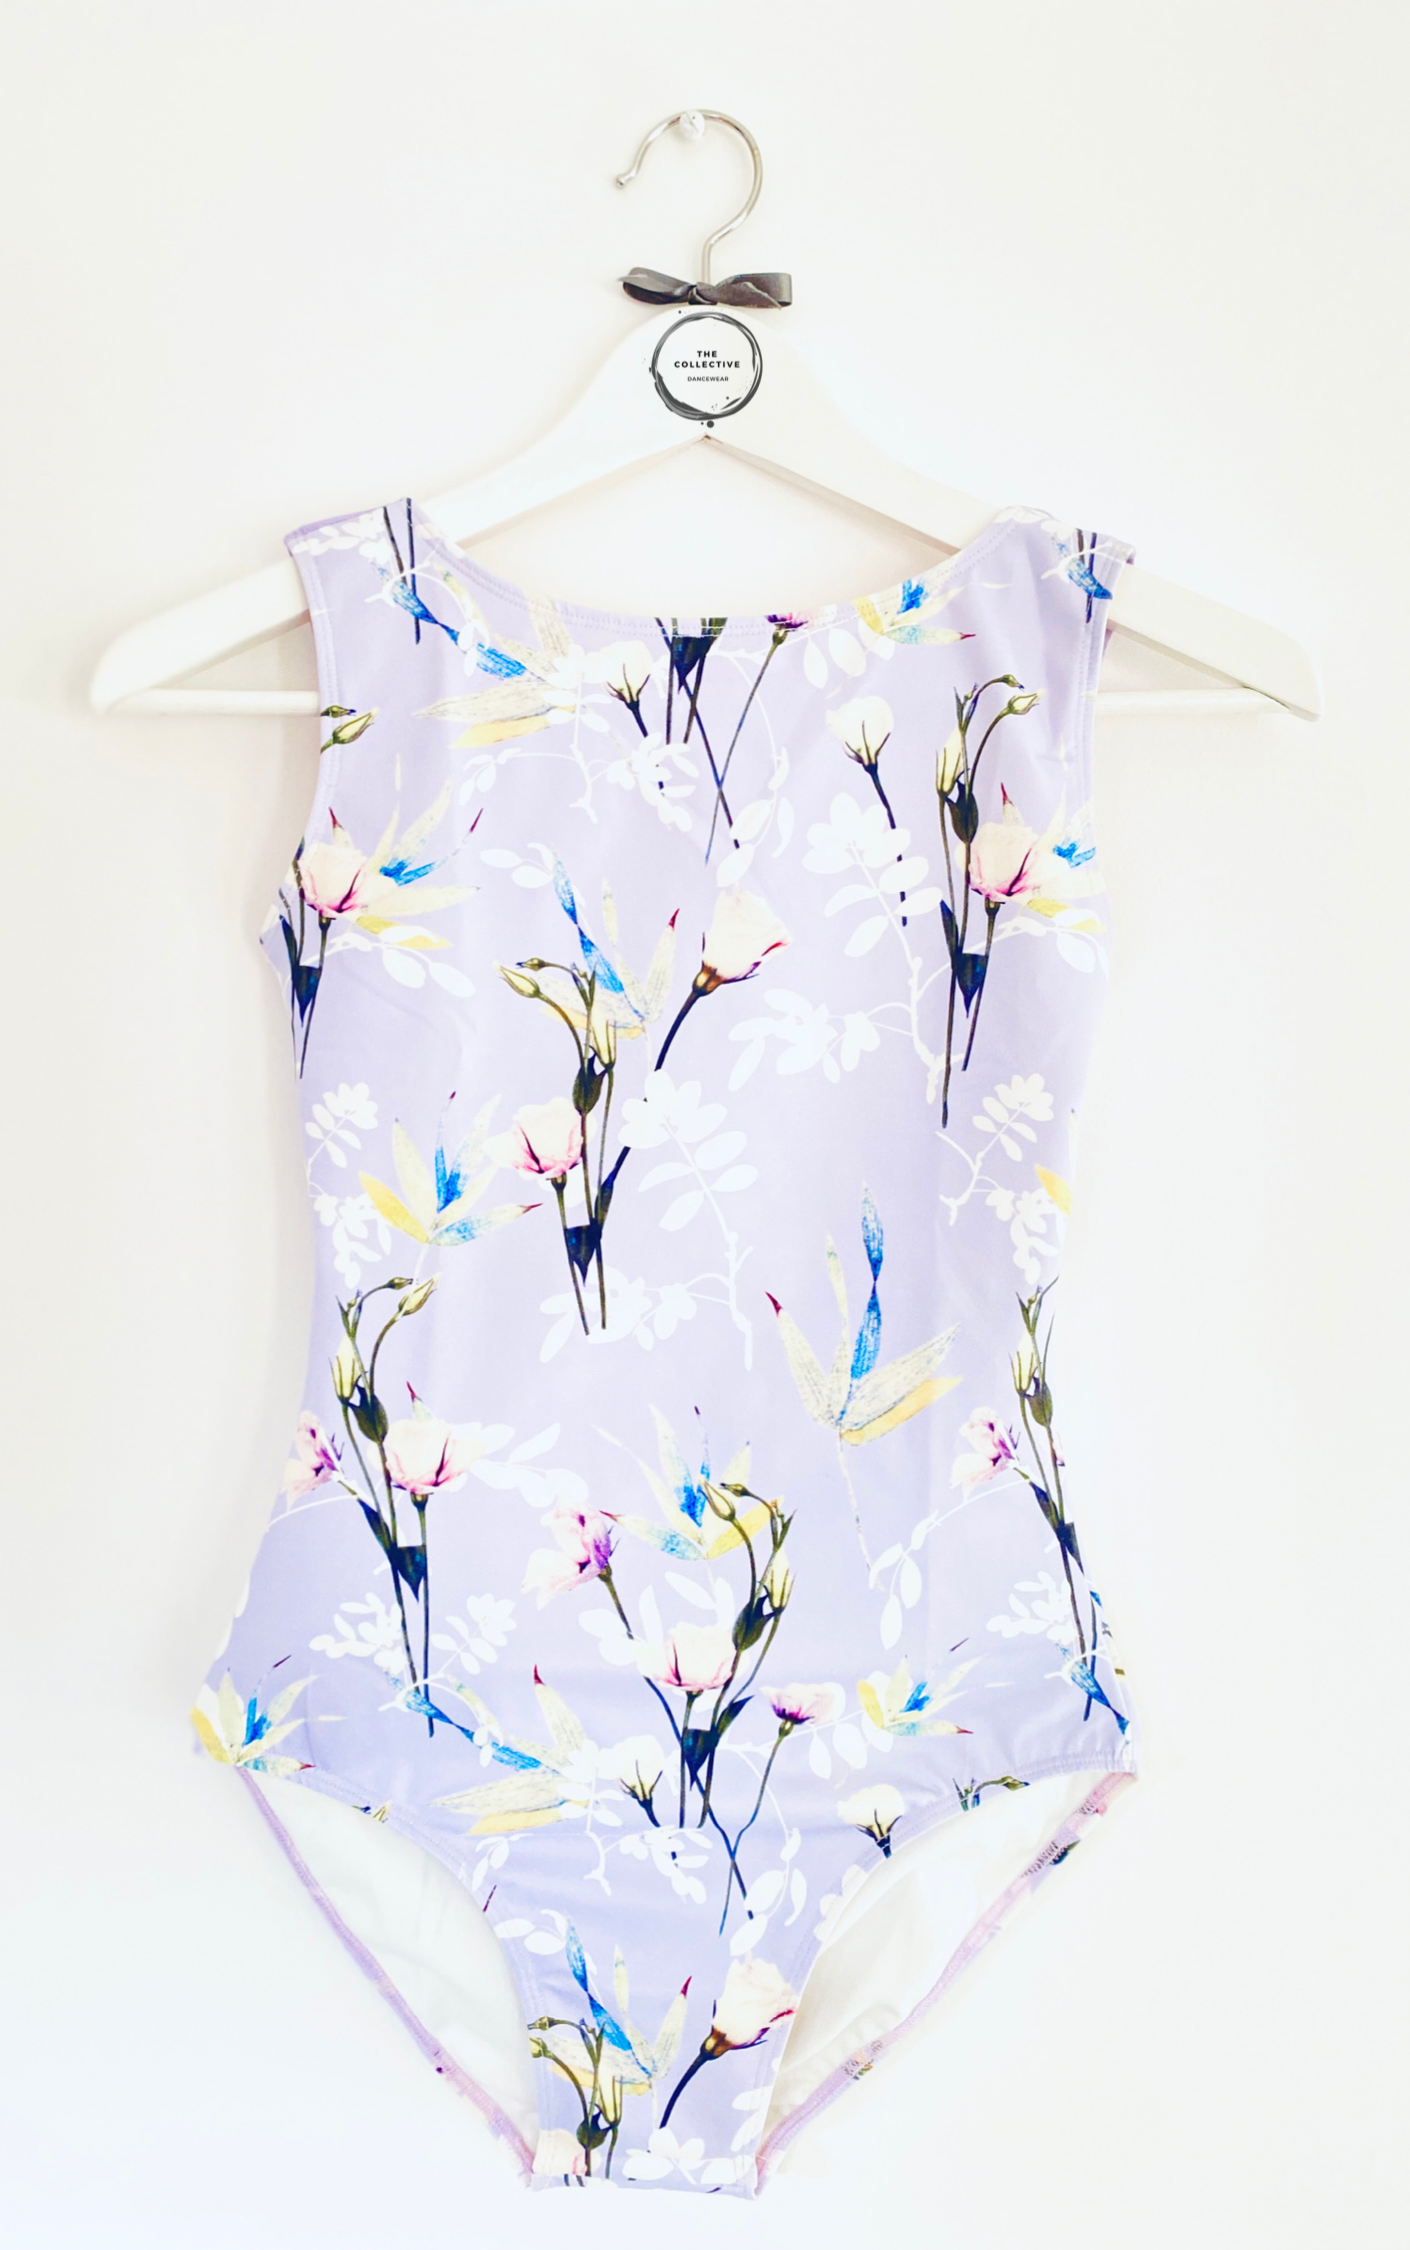 Sleeveless tank leotard with meadow flower pattern on a lilac background from The Collective Dancewear